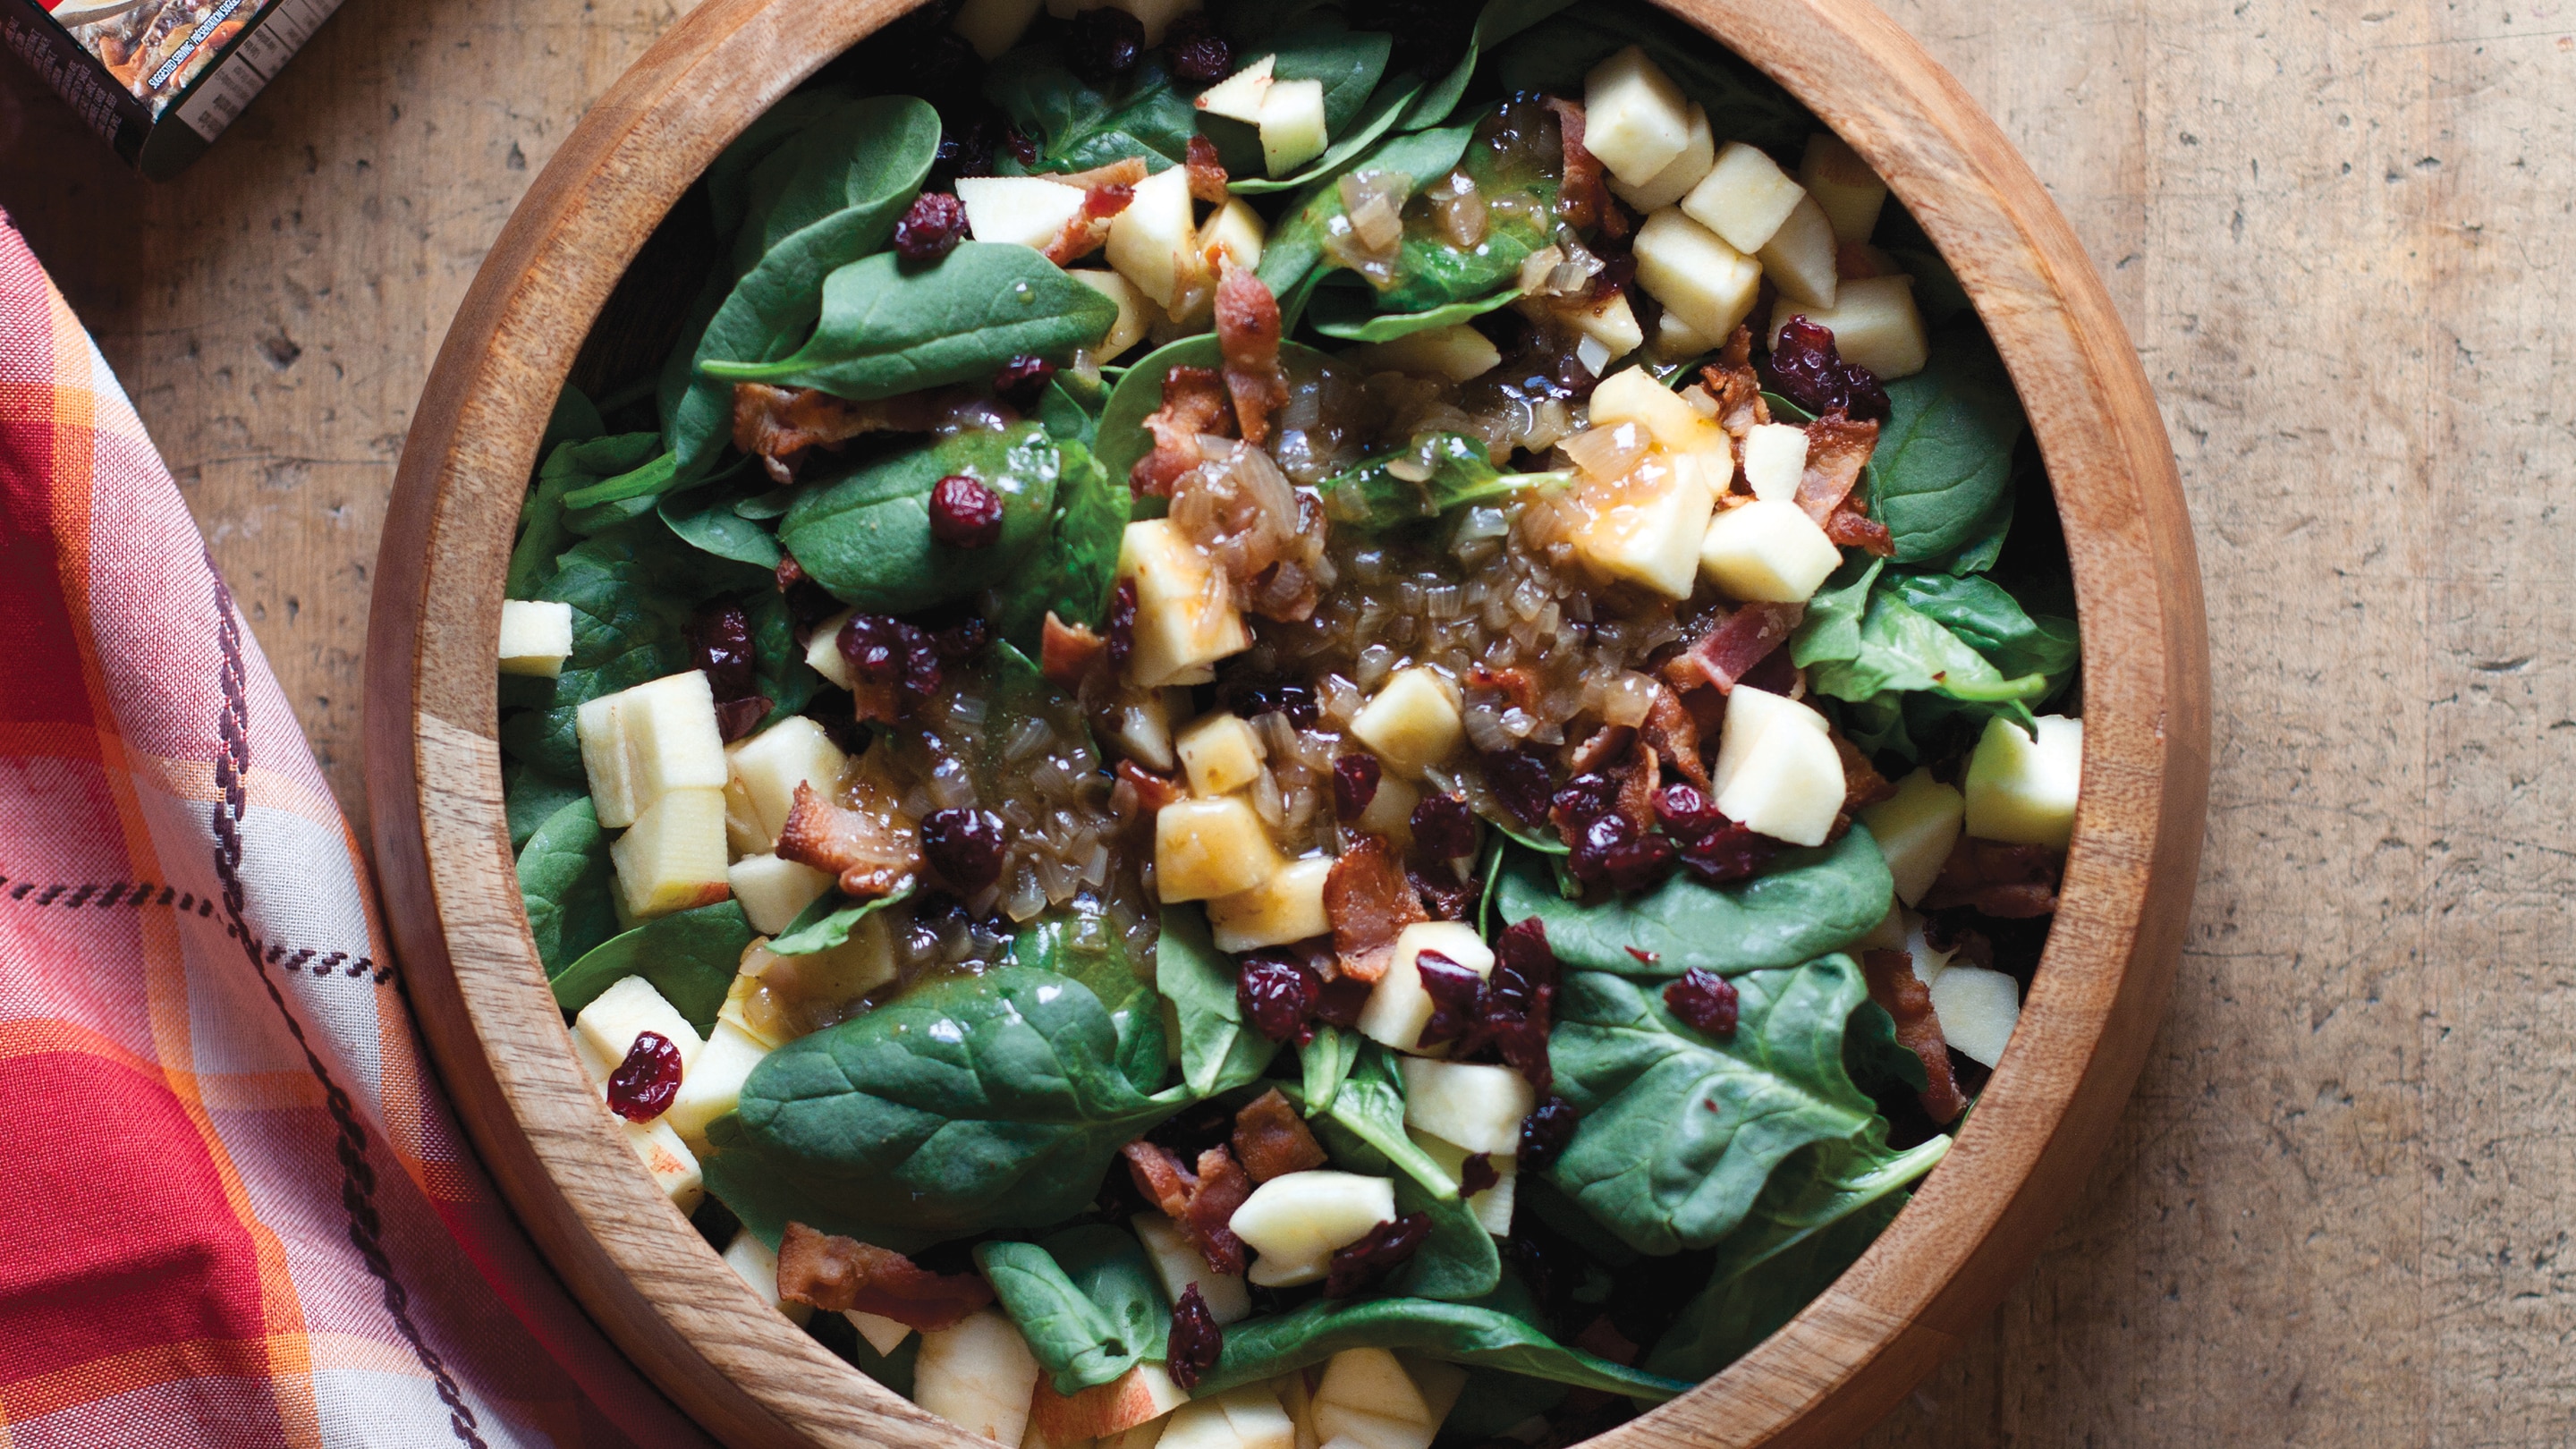 Warm spinach salad in wooden bowl covered with apple chunks, dried cranberries and dressing